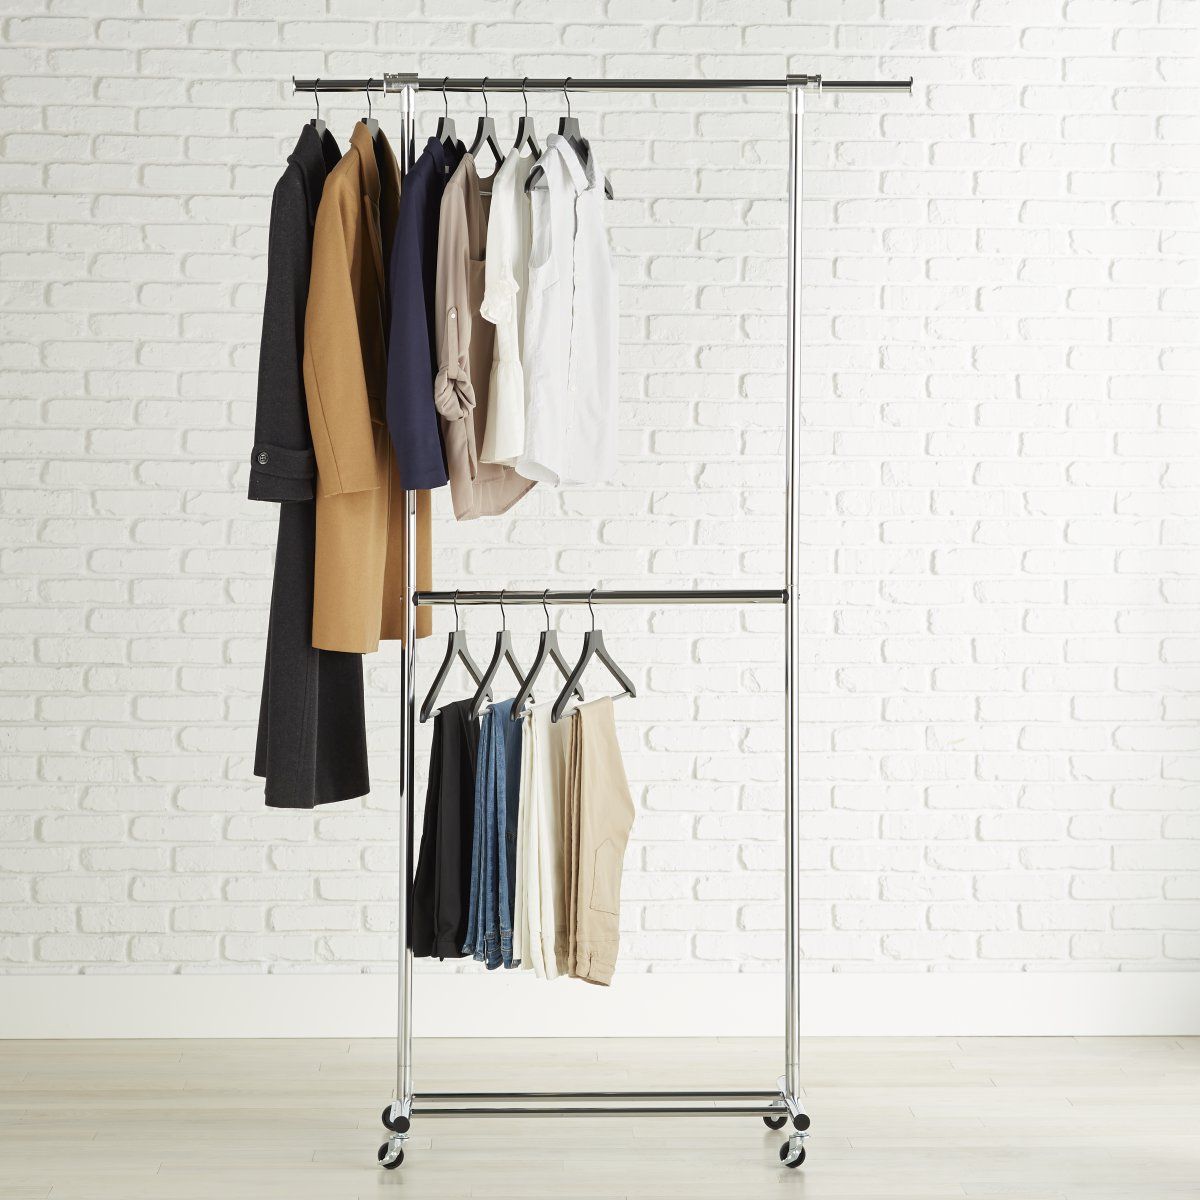 Double Hang Chrome Garment Rack | The Container Store Throughout Chrome Garment Wardrobes (View 4 of 20)